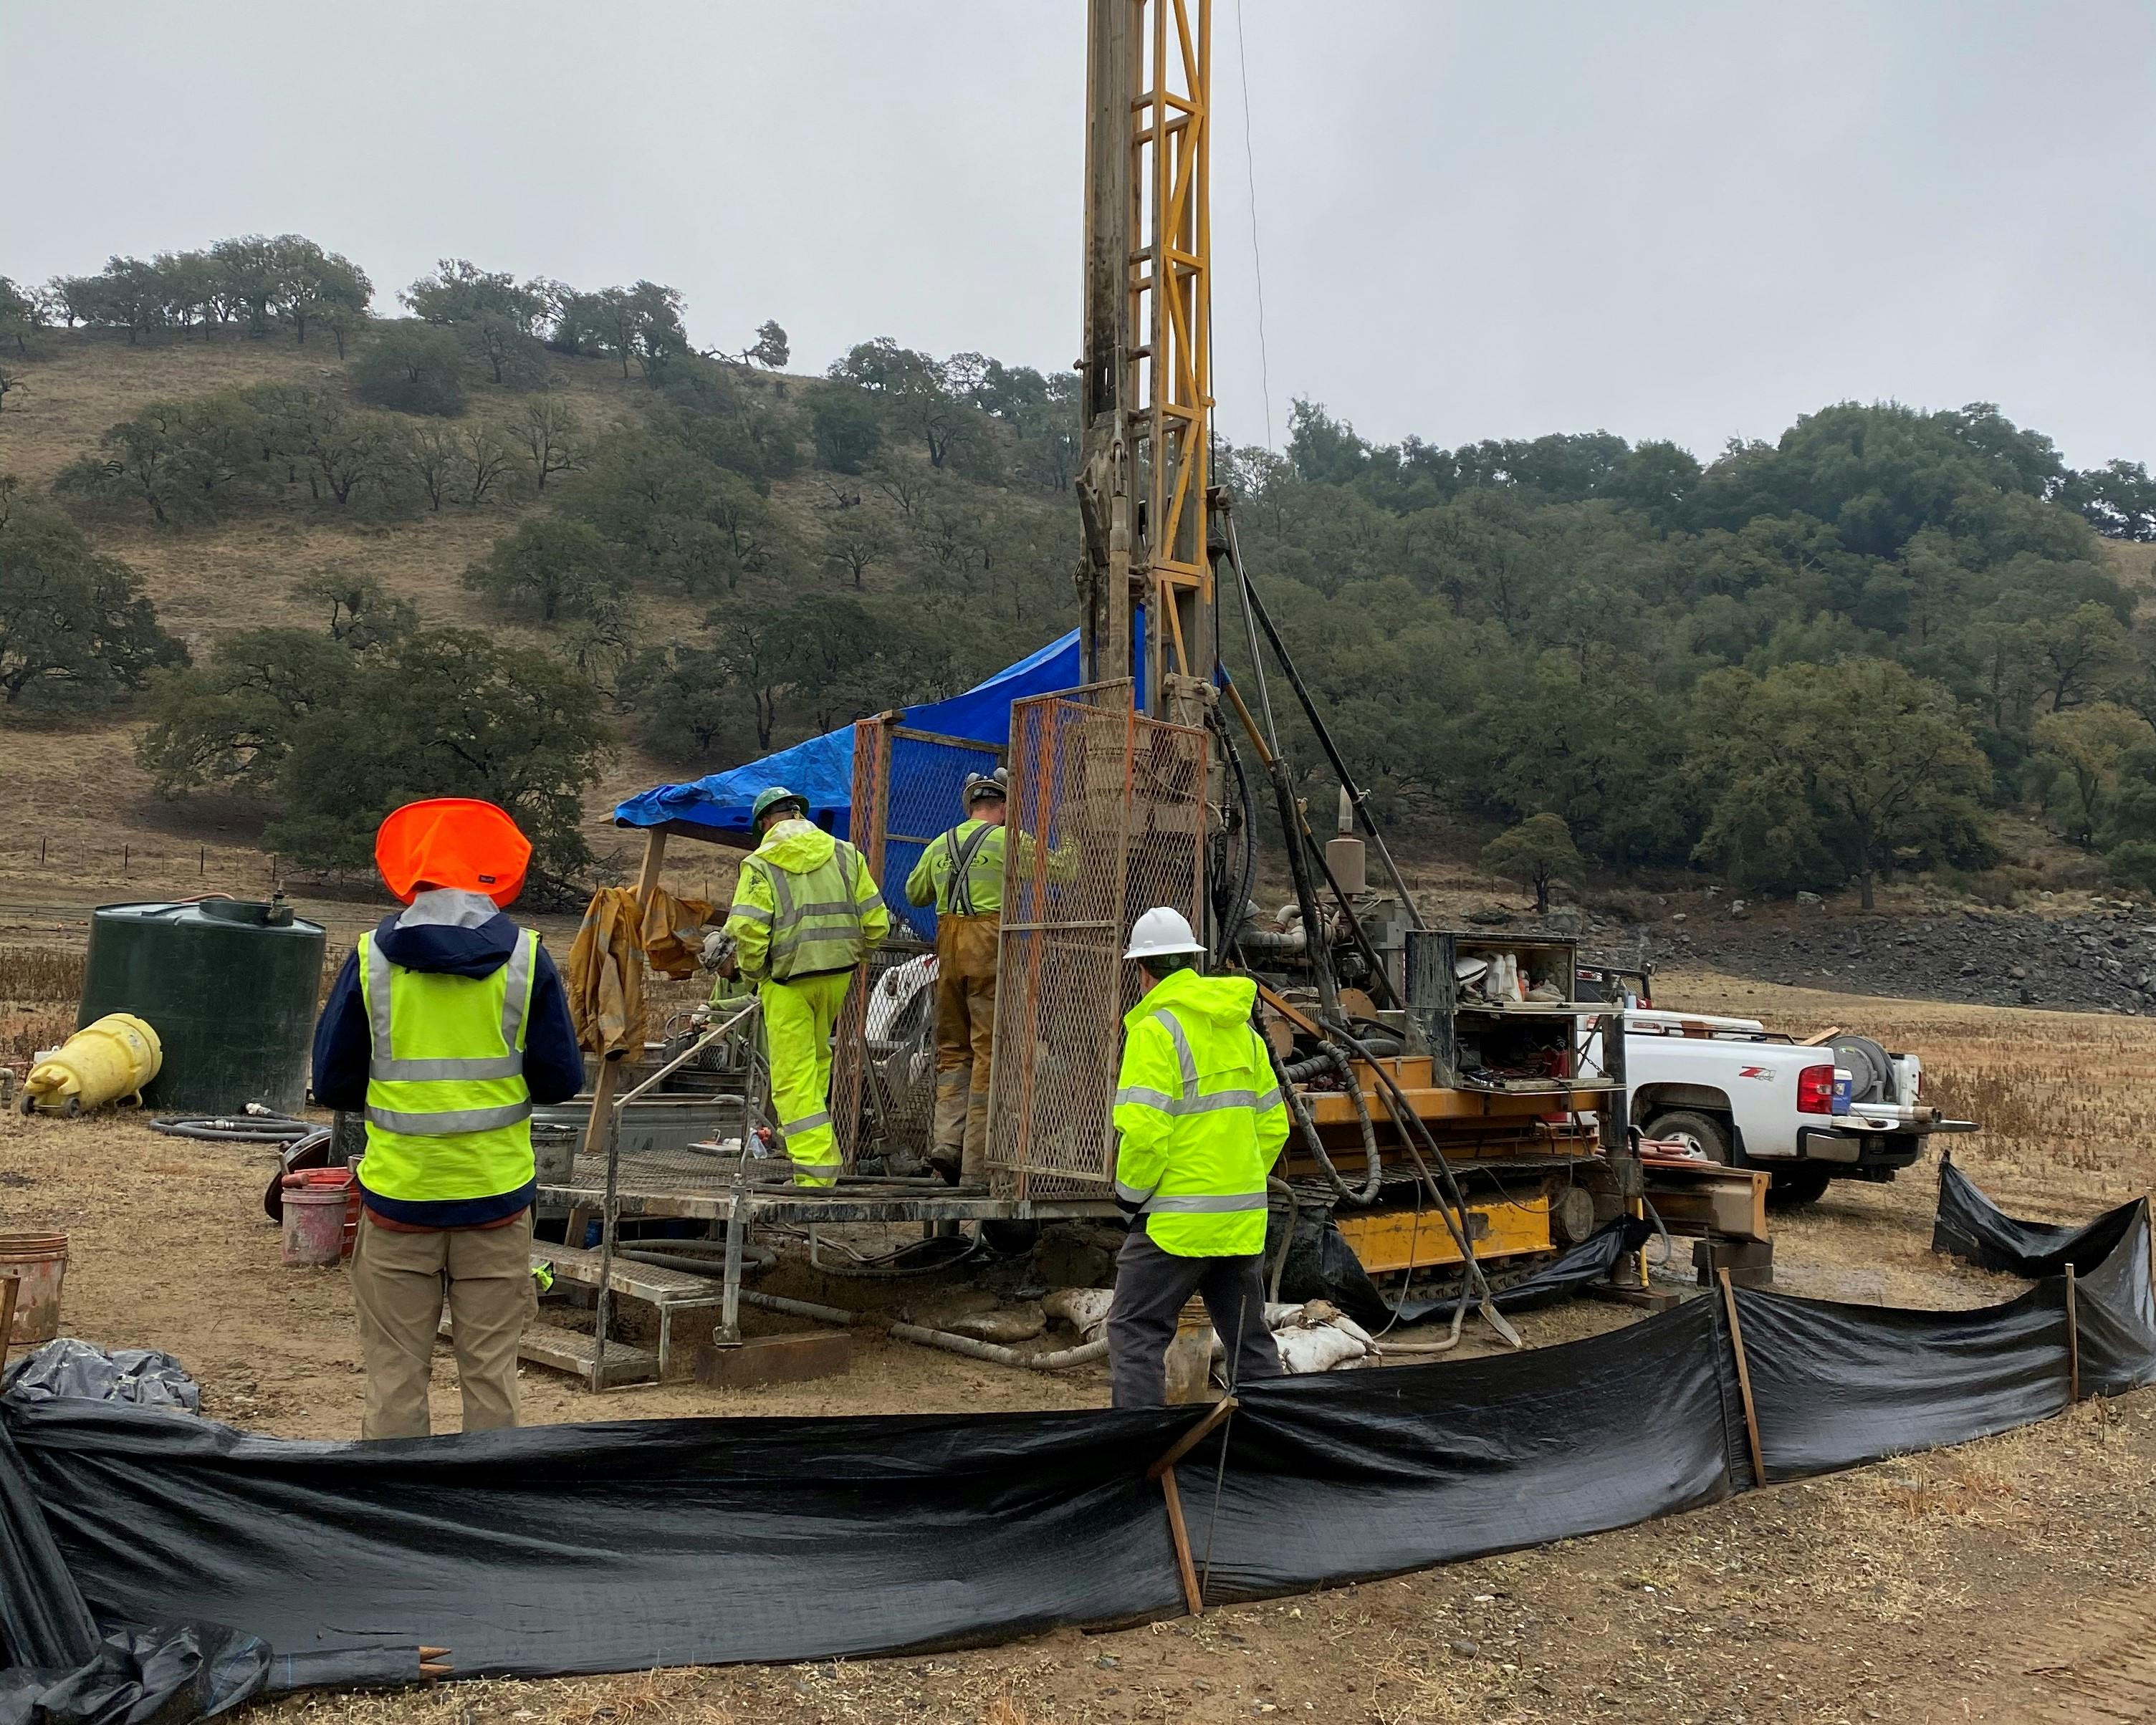 Valley Water drilled boreholes as deep as 340 feet into the ground to gather information about the soil and rock characteristics at the site of the Pacheco Reservoir Expansion Project..